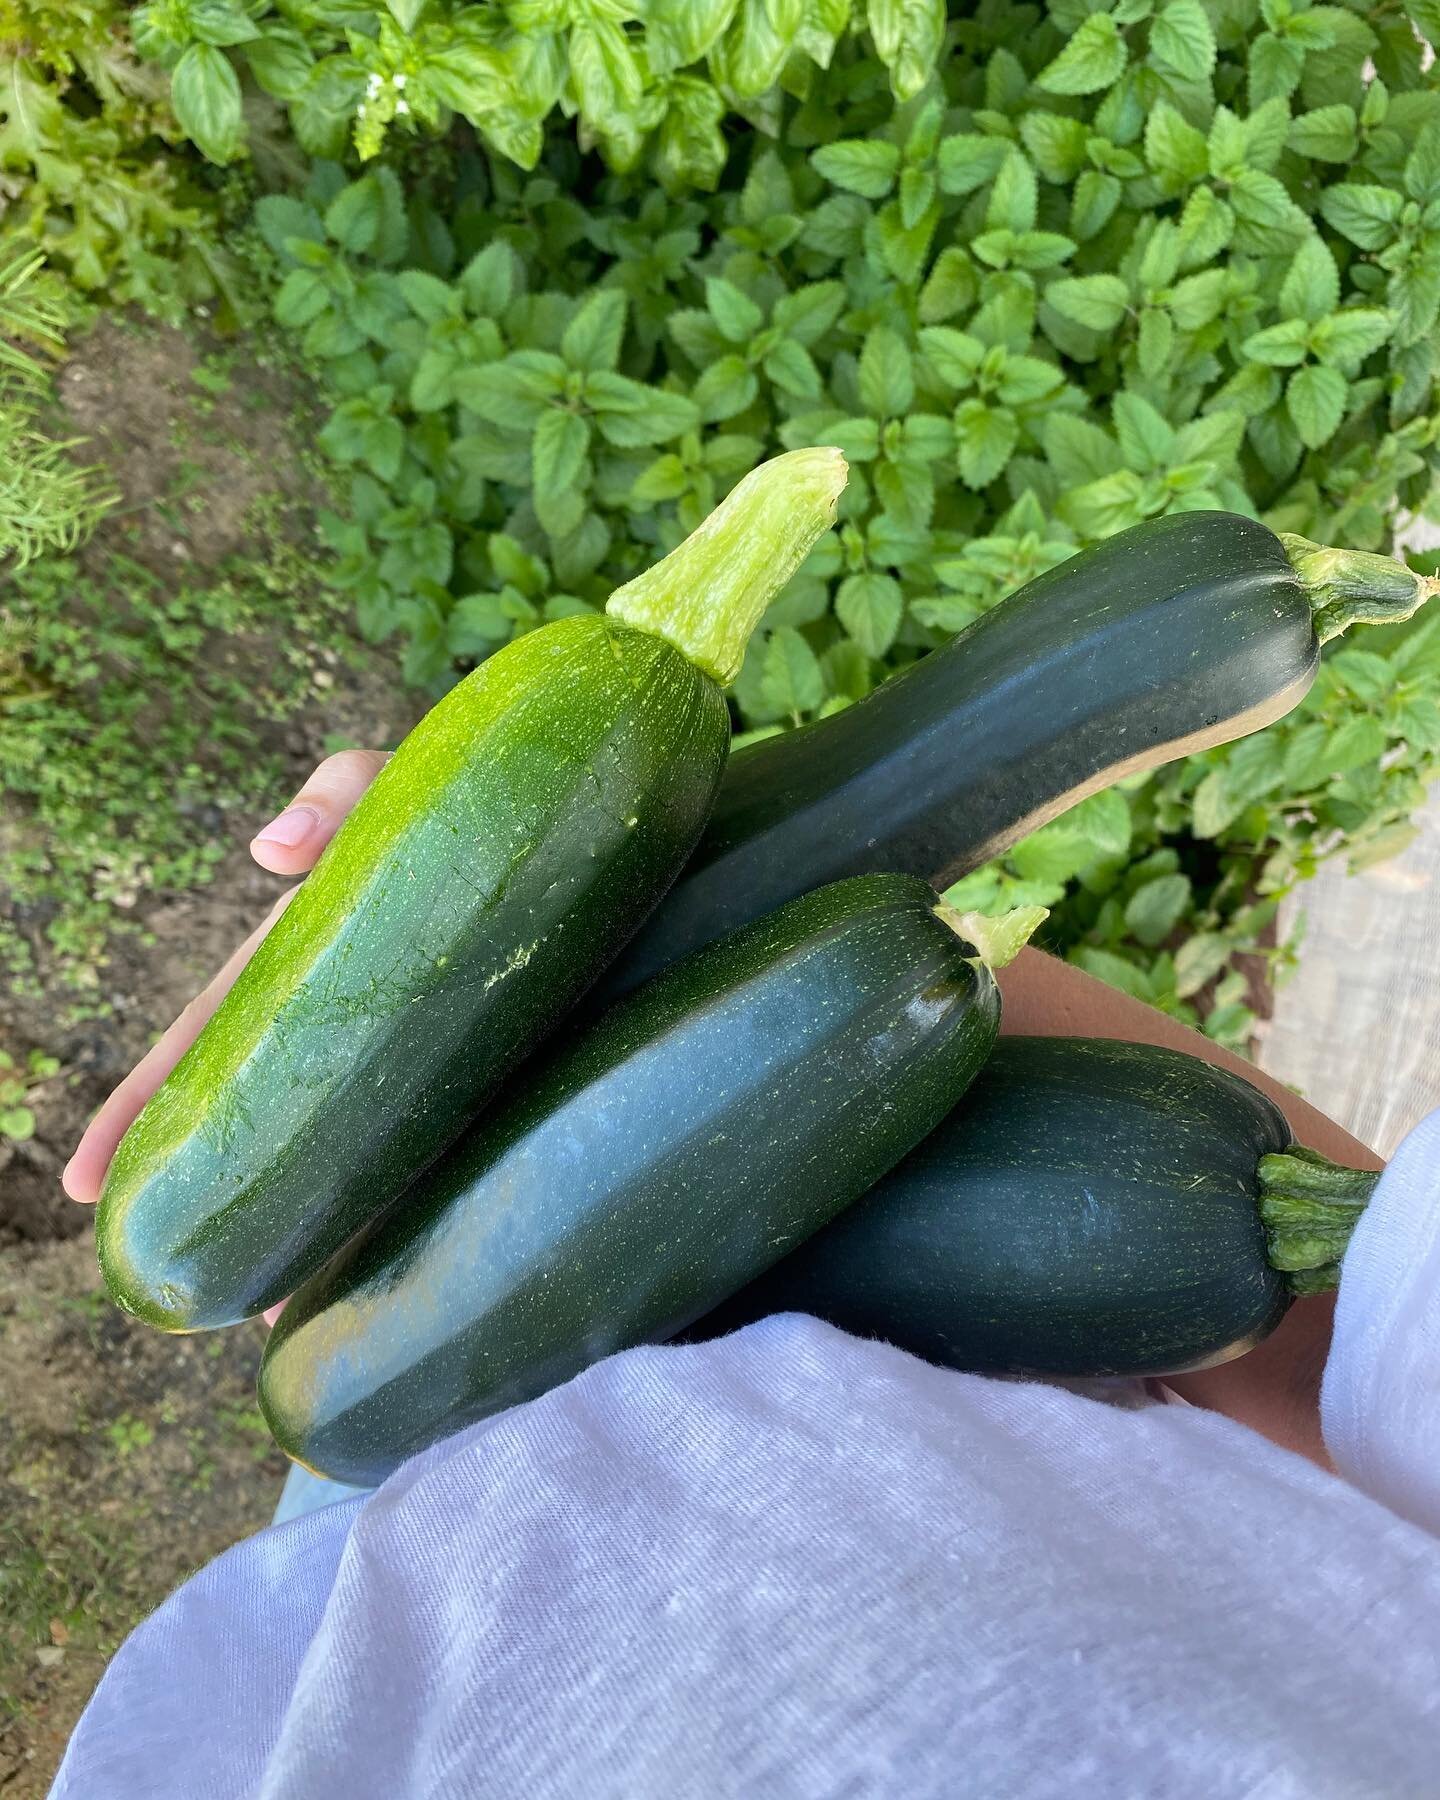 An arm full of zuchs! I&rsquo;m a pretty happy girl. The zoodles will be flowing, some slice will definitely be on the breaky menu next week and I think we&rsquo;ll be overflowing with @grownandgathered pickled zucchini by the time the season is out!